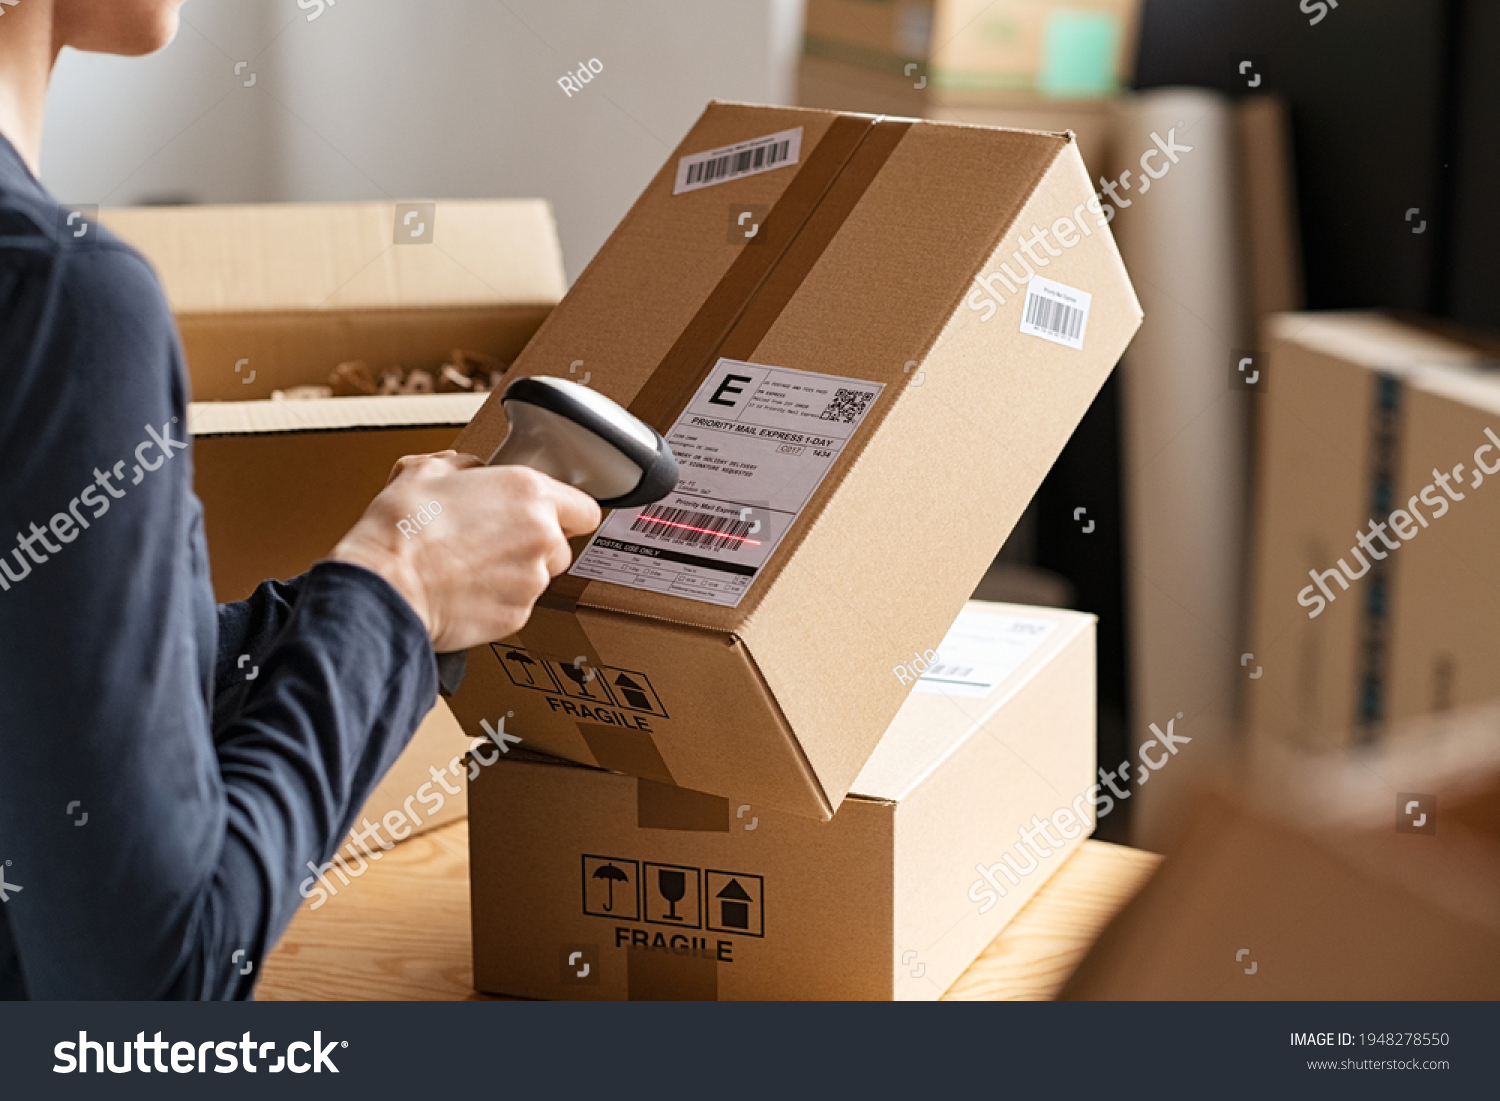 Hands scanning barcode on delivery parcel. Worker scan barcode of cardboard packages before delivery at storage. Woman working in factory warehouse scanning labels on the boxes with barcode scanner. #1948278550